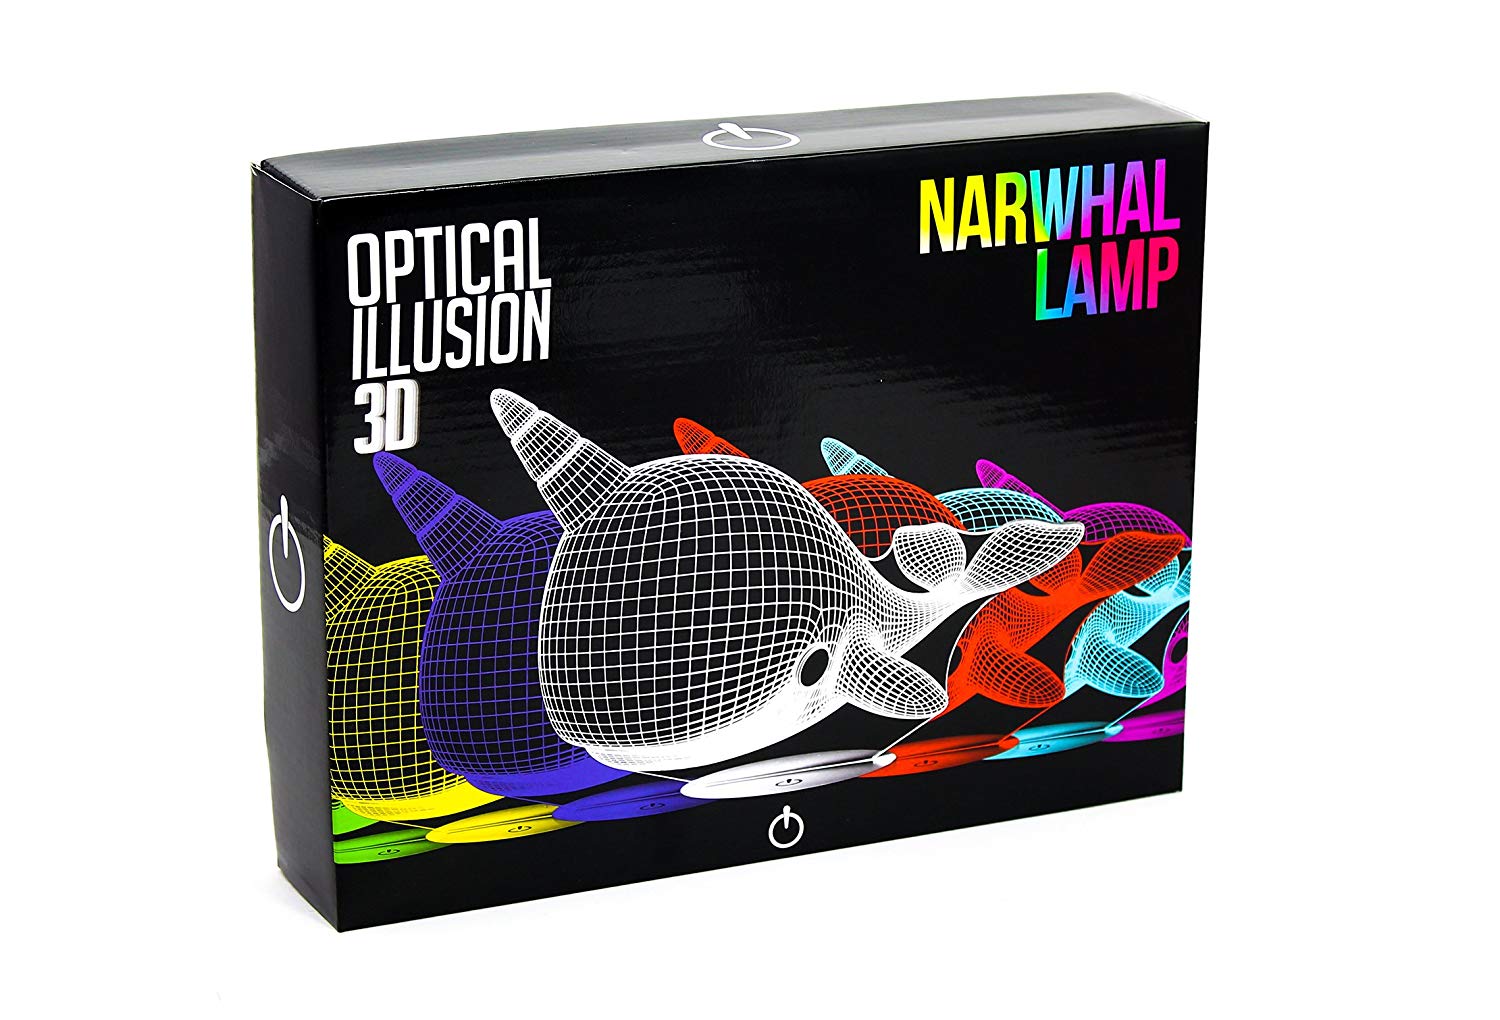 Optical Illusion 3D Whale Narwhal Lamp